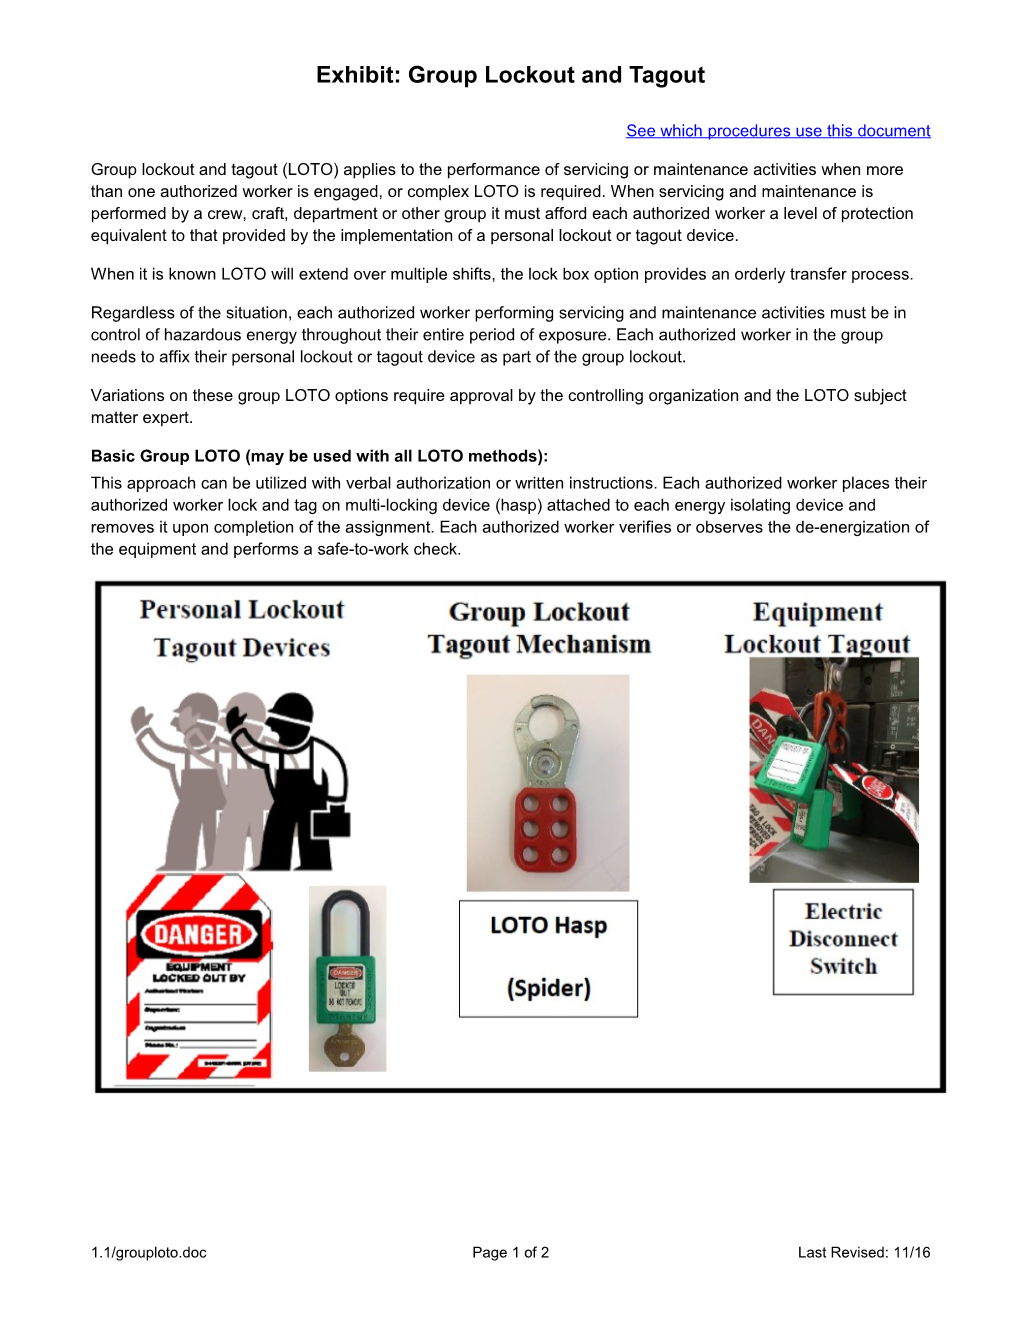 Group Lockout and Tagout